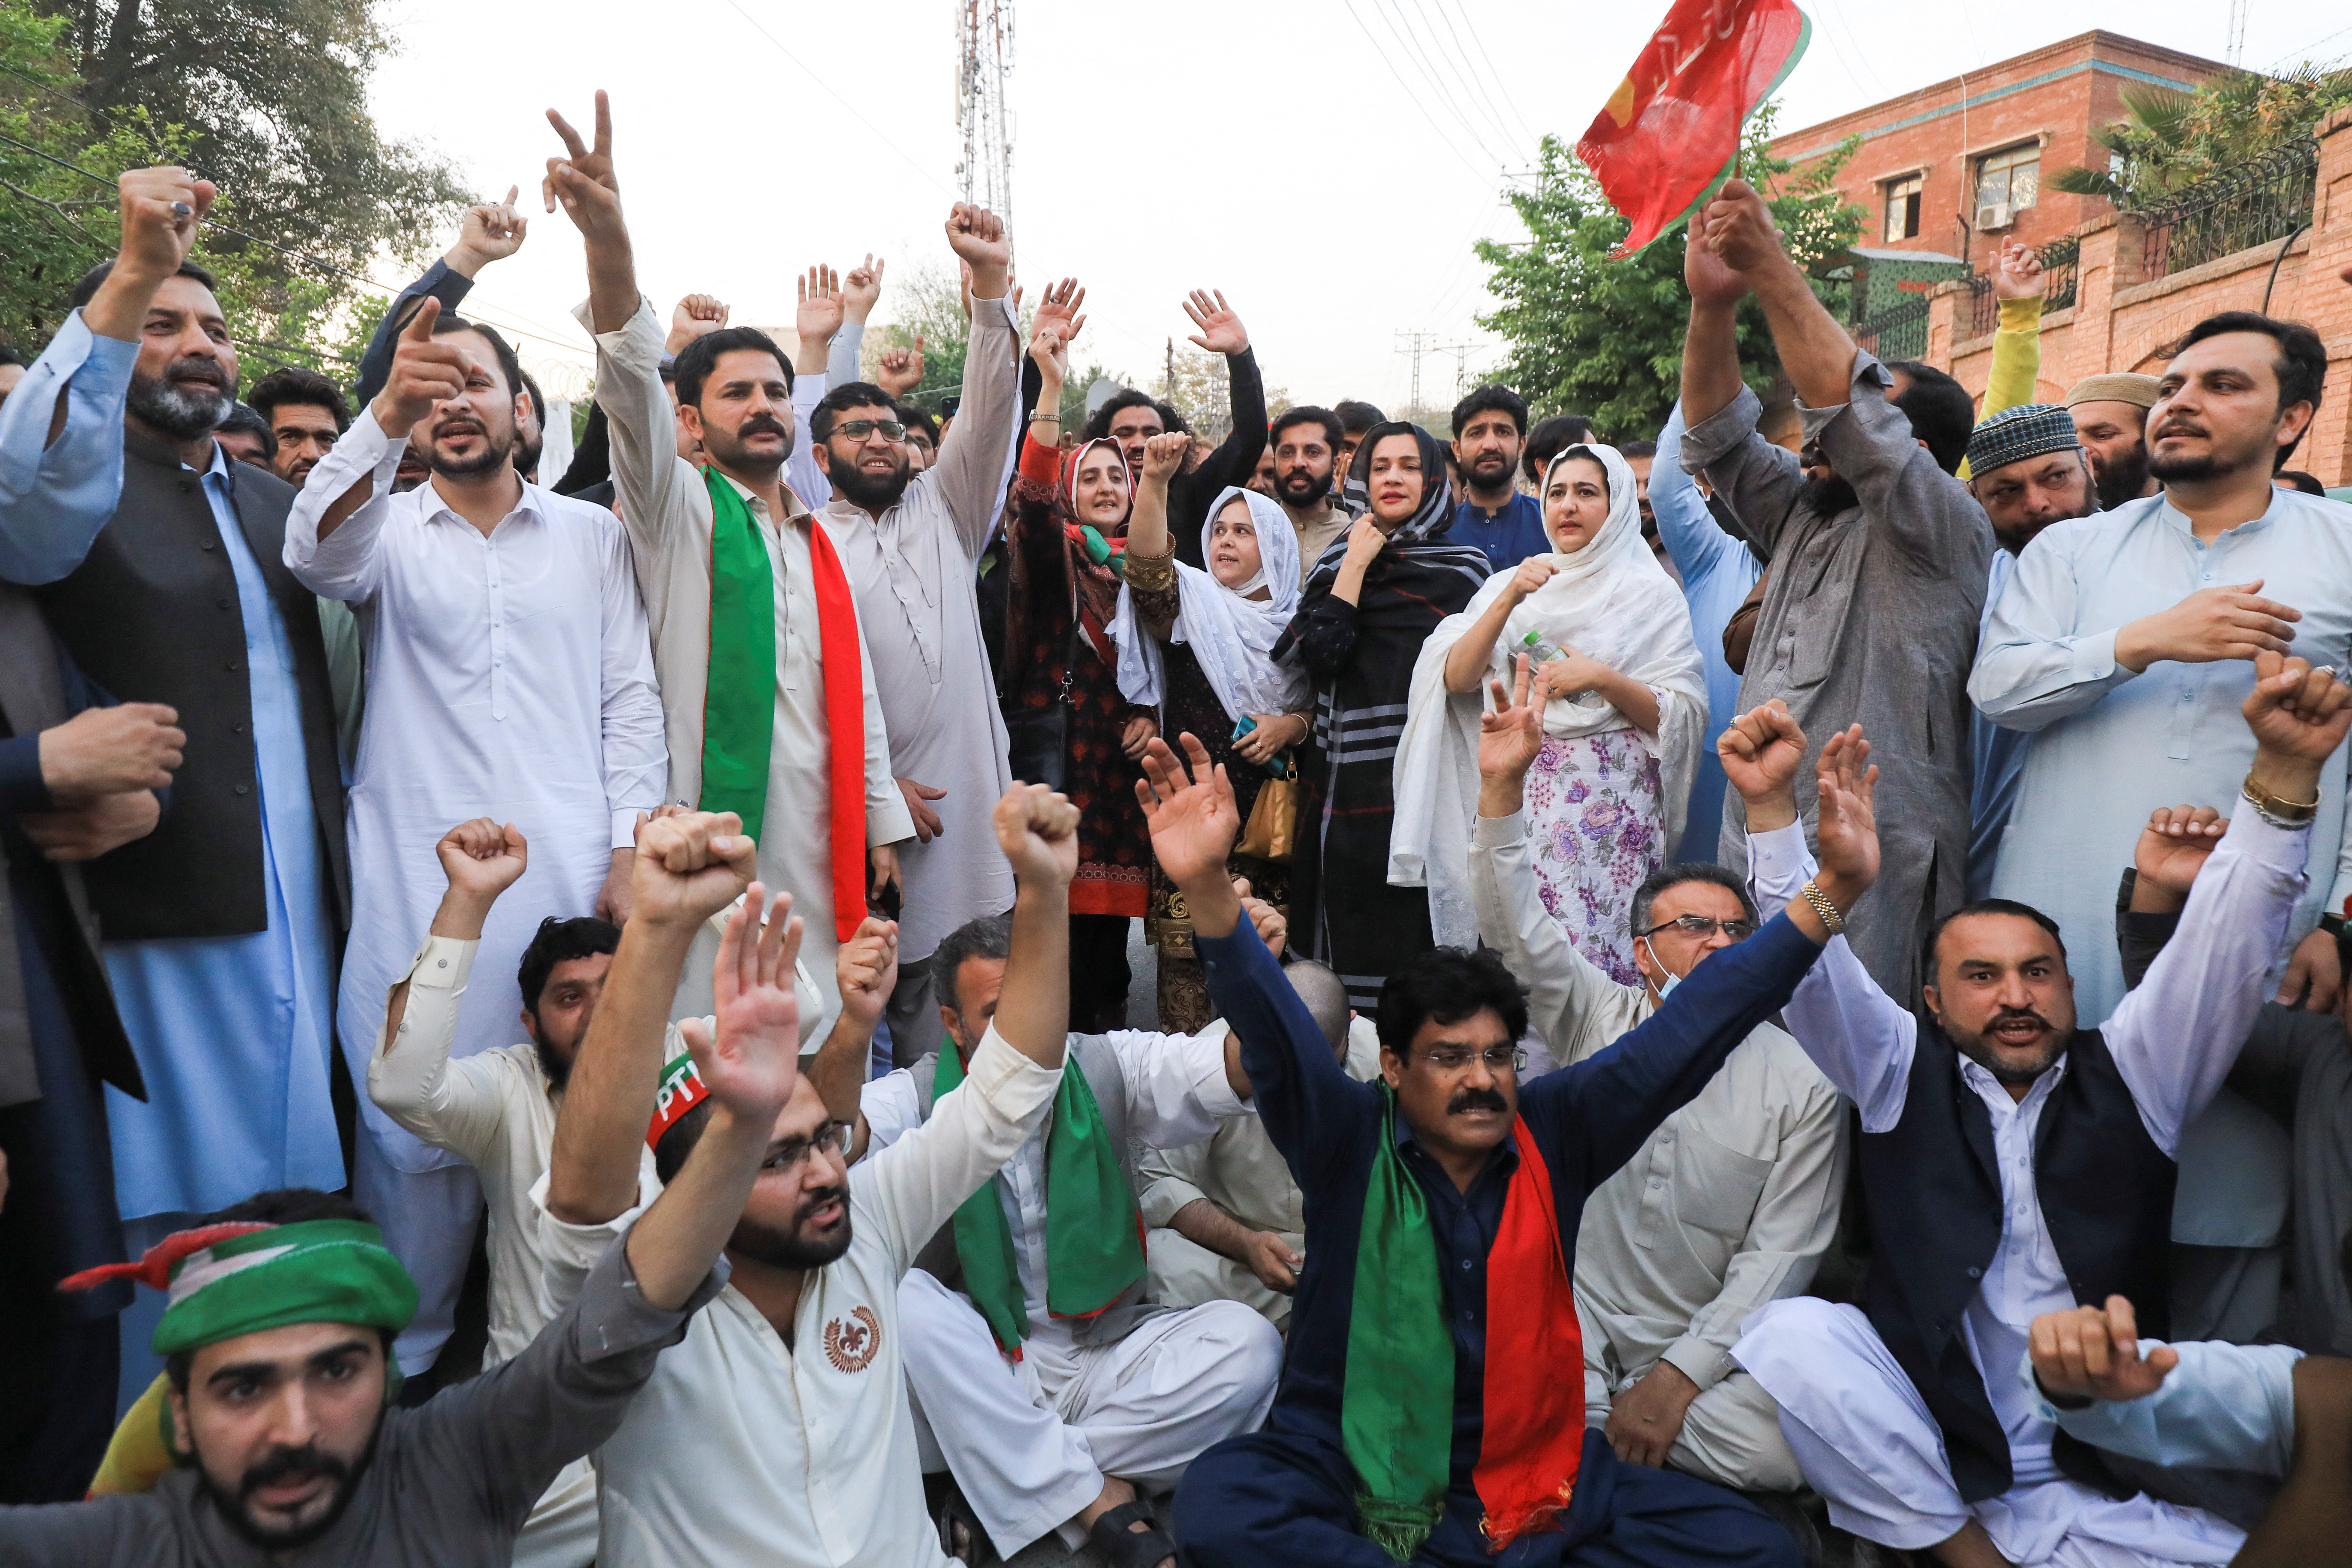 Supporters of former Pakistani PM Khan protest ahead of Khan's possible arrest, in Peshawar